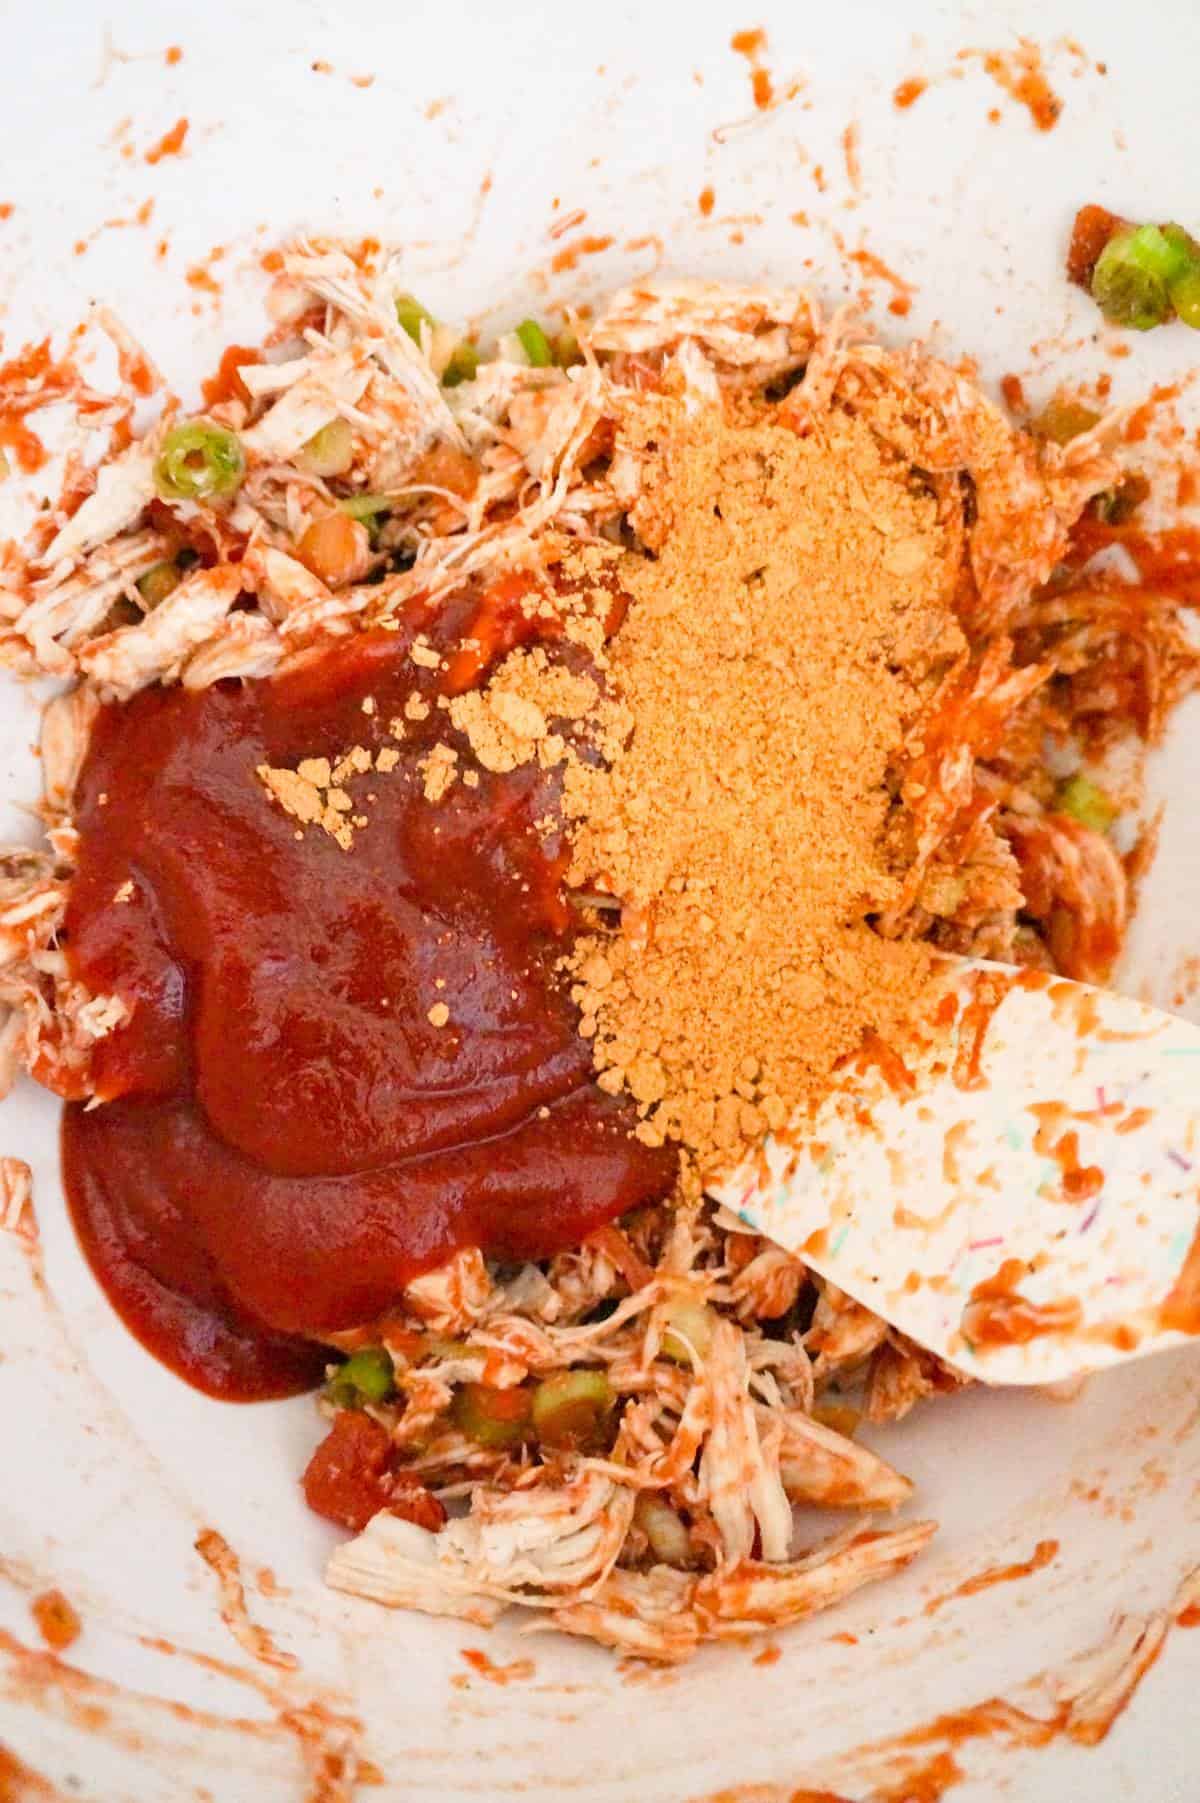 chili sauce and taco seasoning on top of shredded chicken and salsa mixture in a bowl